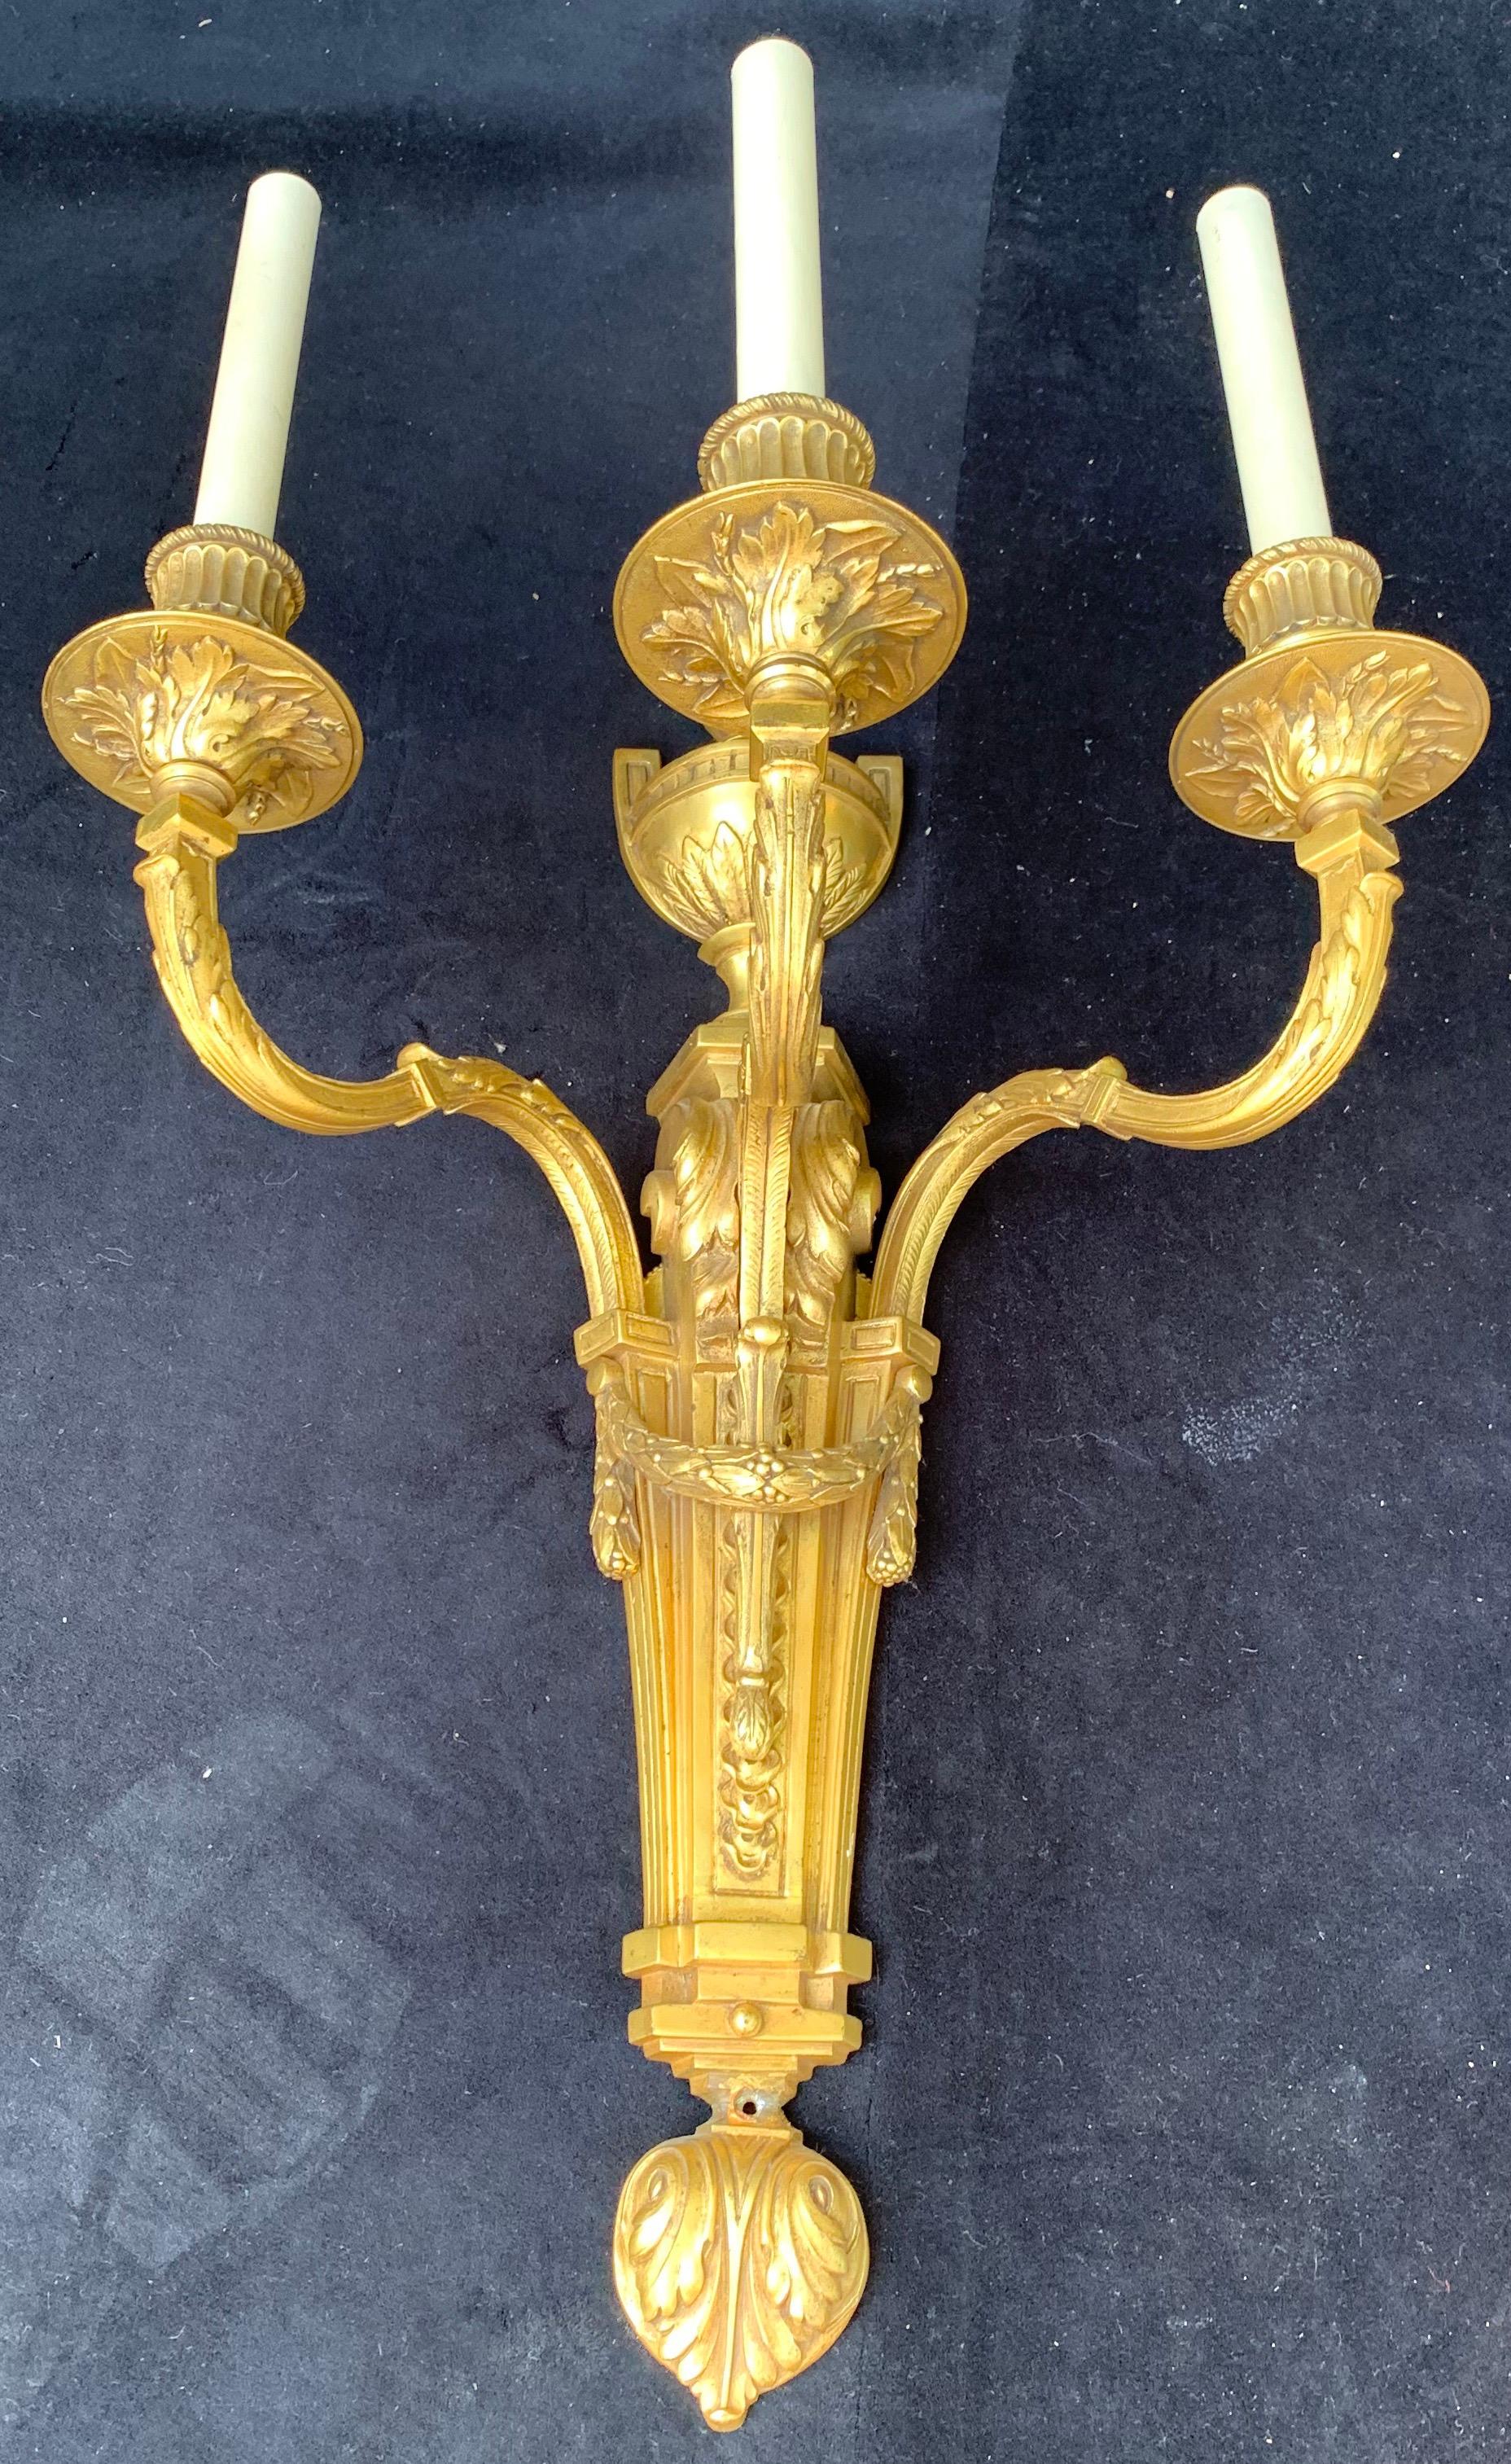 Wonderful Large Pair of French Urn Garland Neoclassical Bronze Caldwell Sconces (amerikanisch)